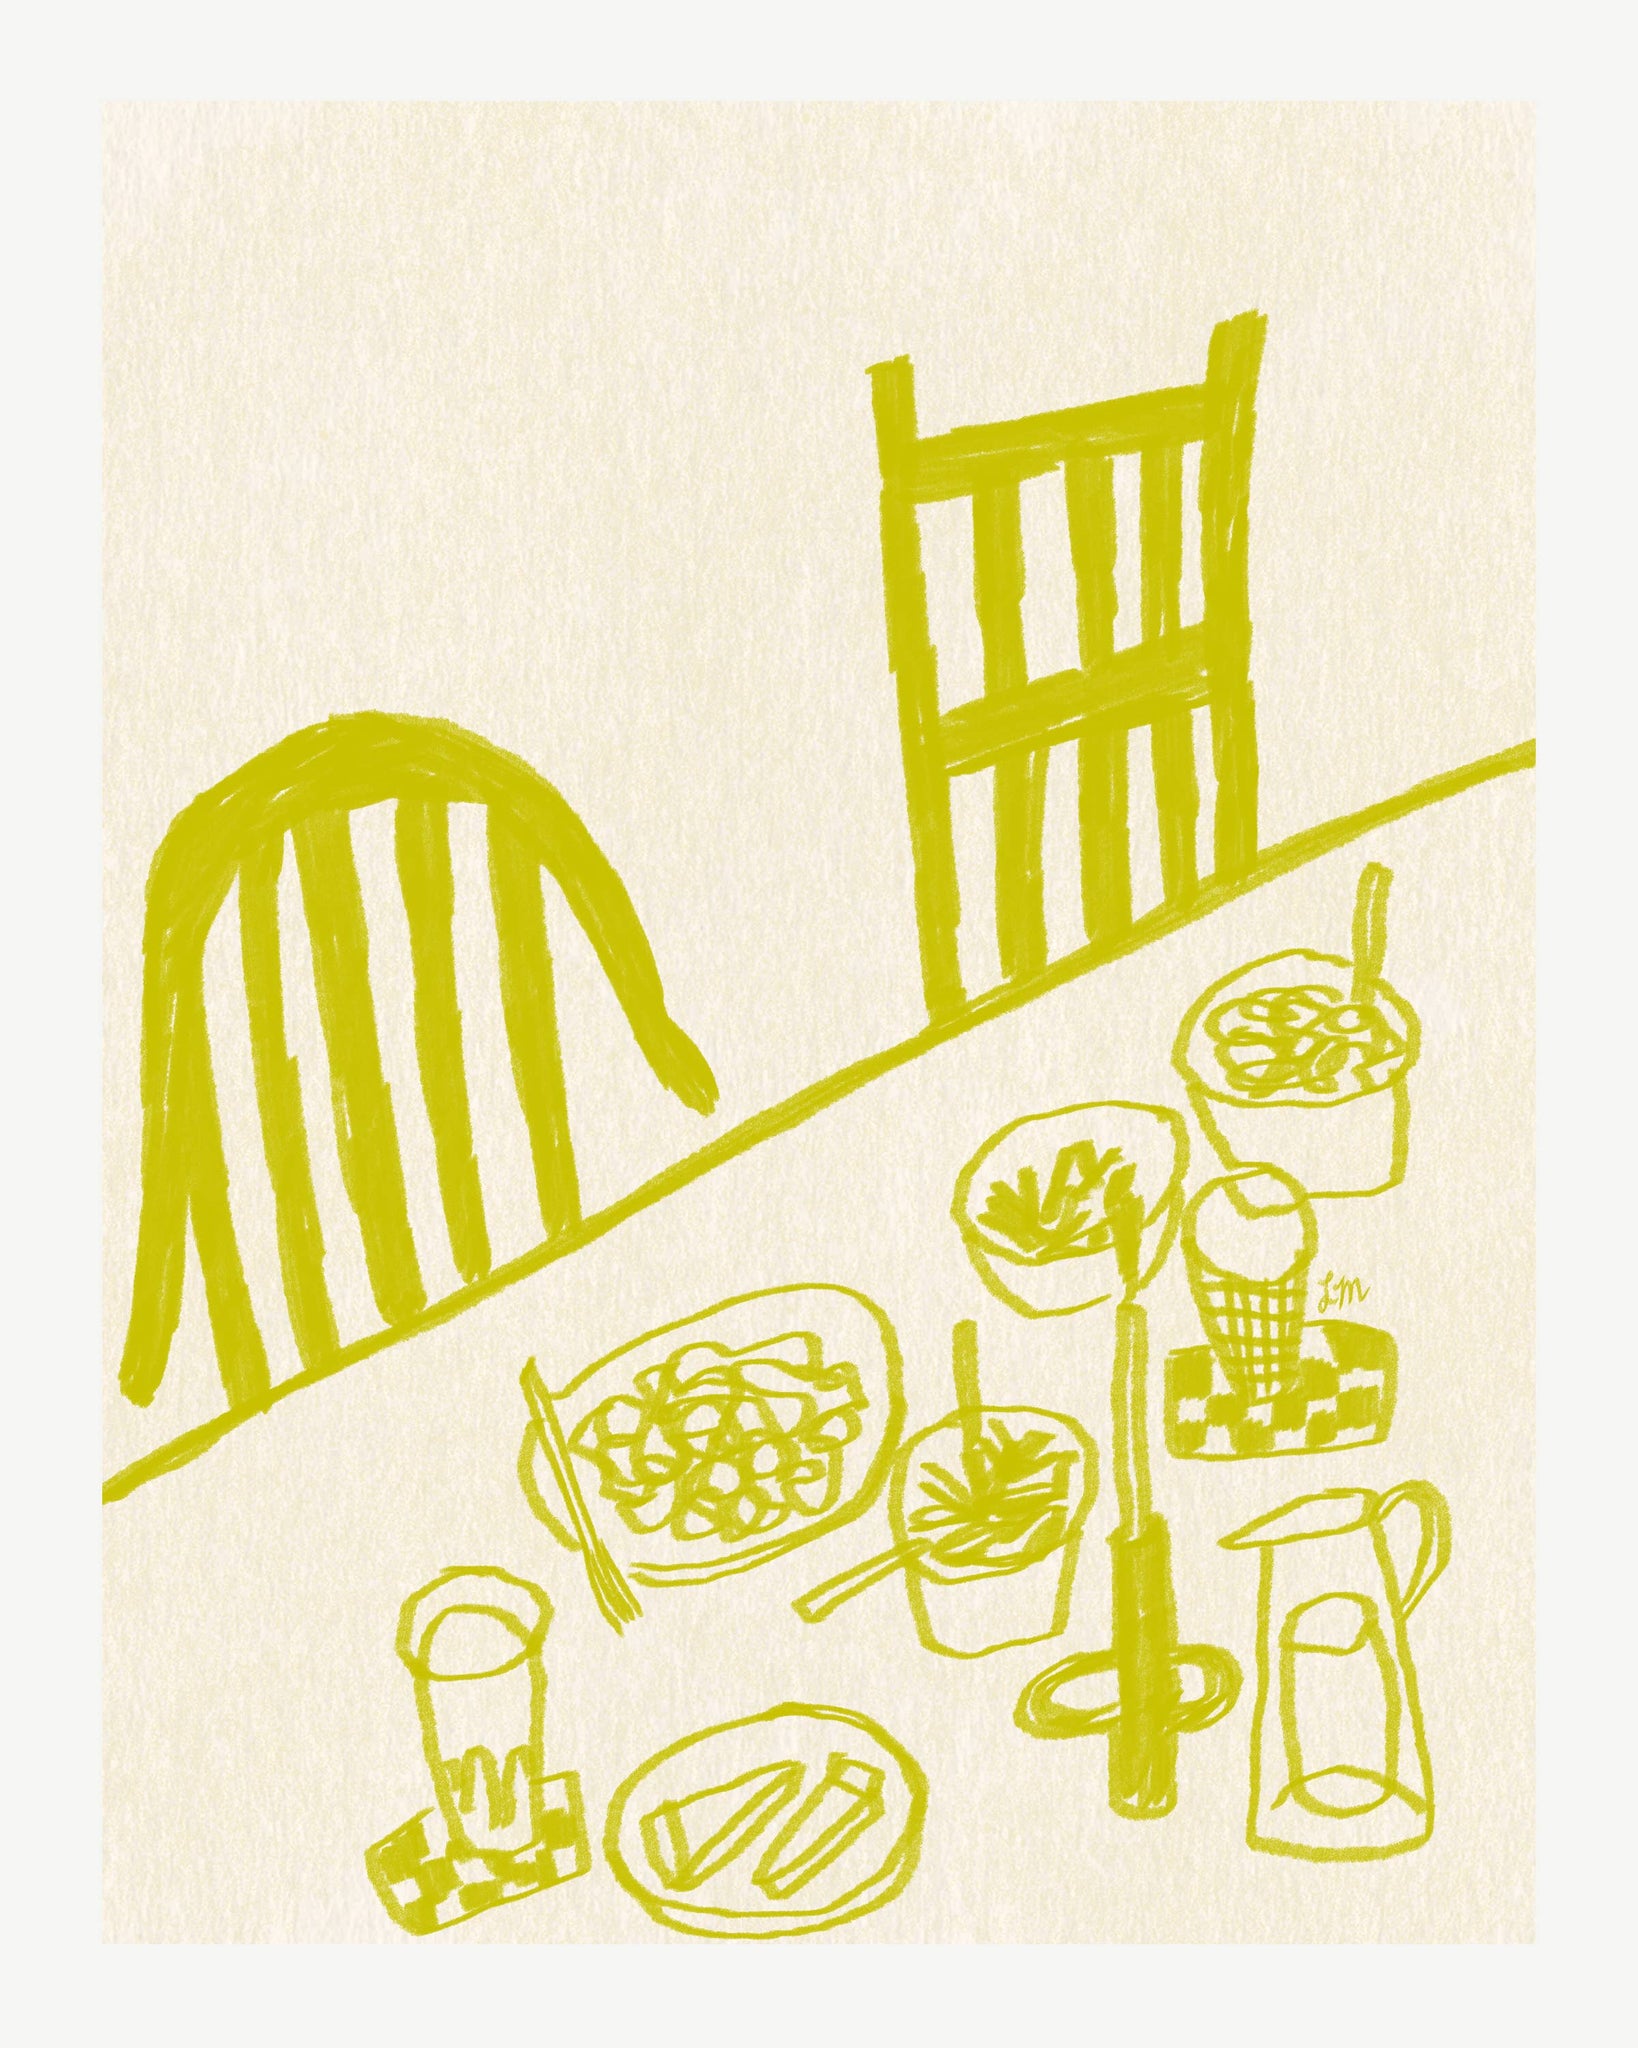 PASTA NIGHT MINI PRINT BY LACEY MCKEEVER